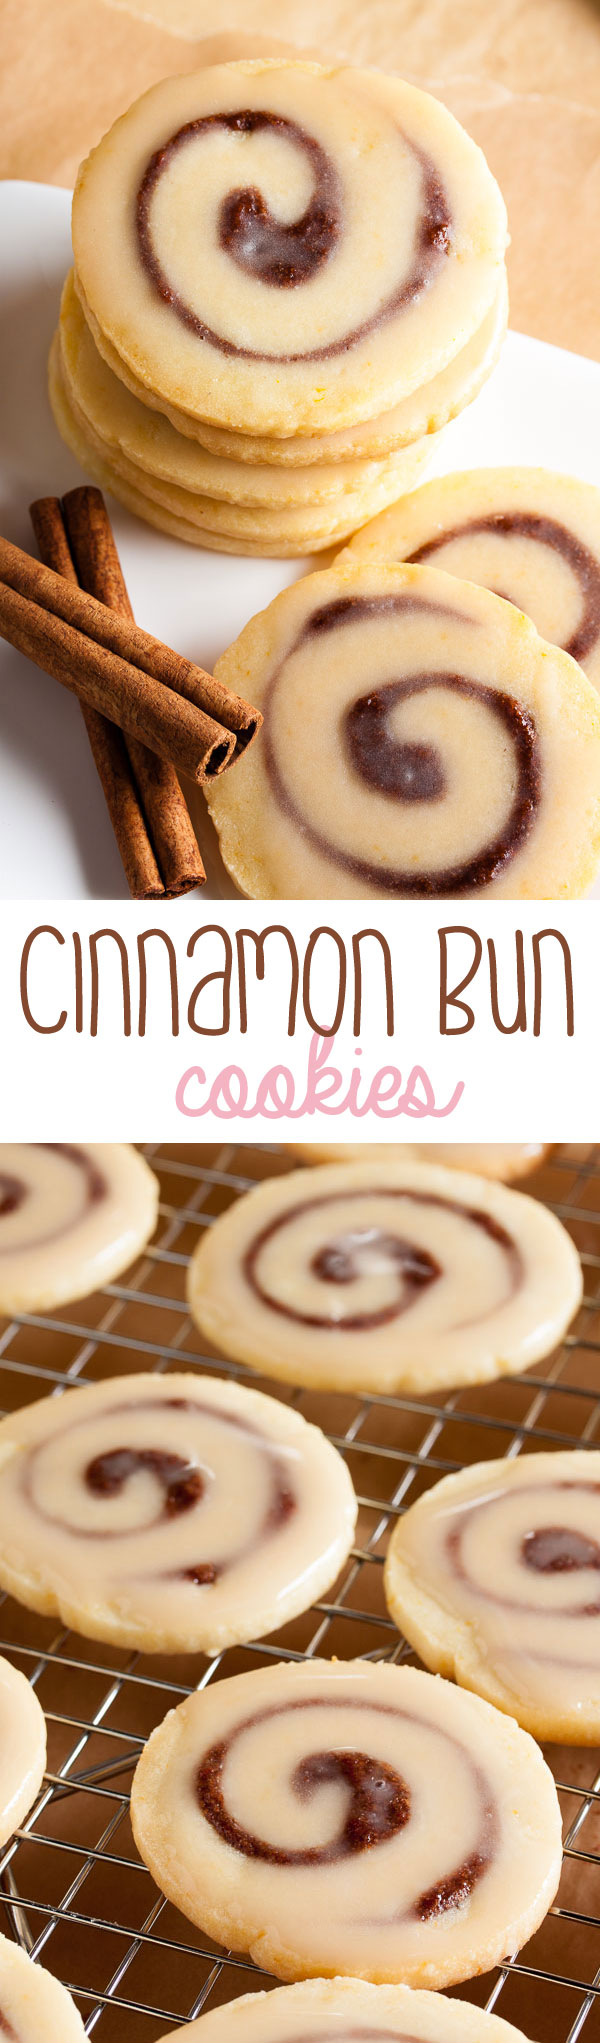 What's better than a cinnamon bun? Cinnamon bun cookies! Soft, tender, and packed with cinnamon flavour.